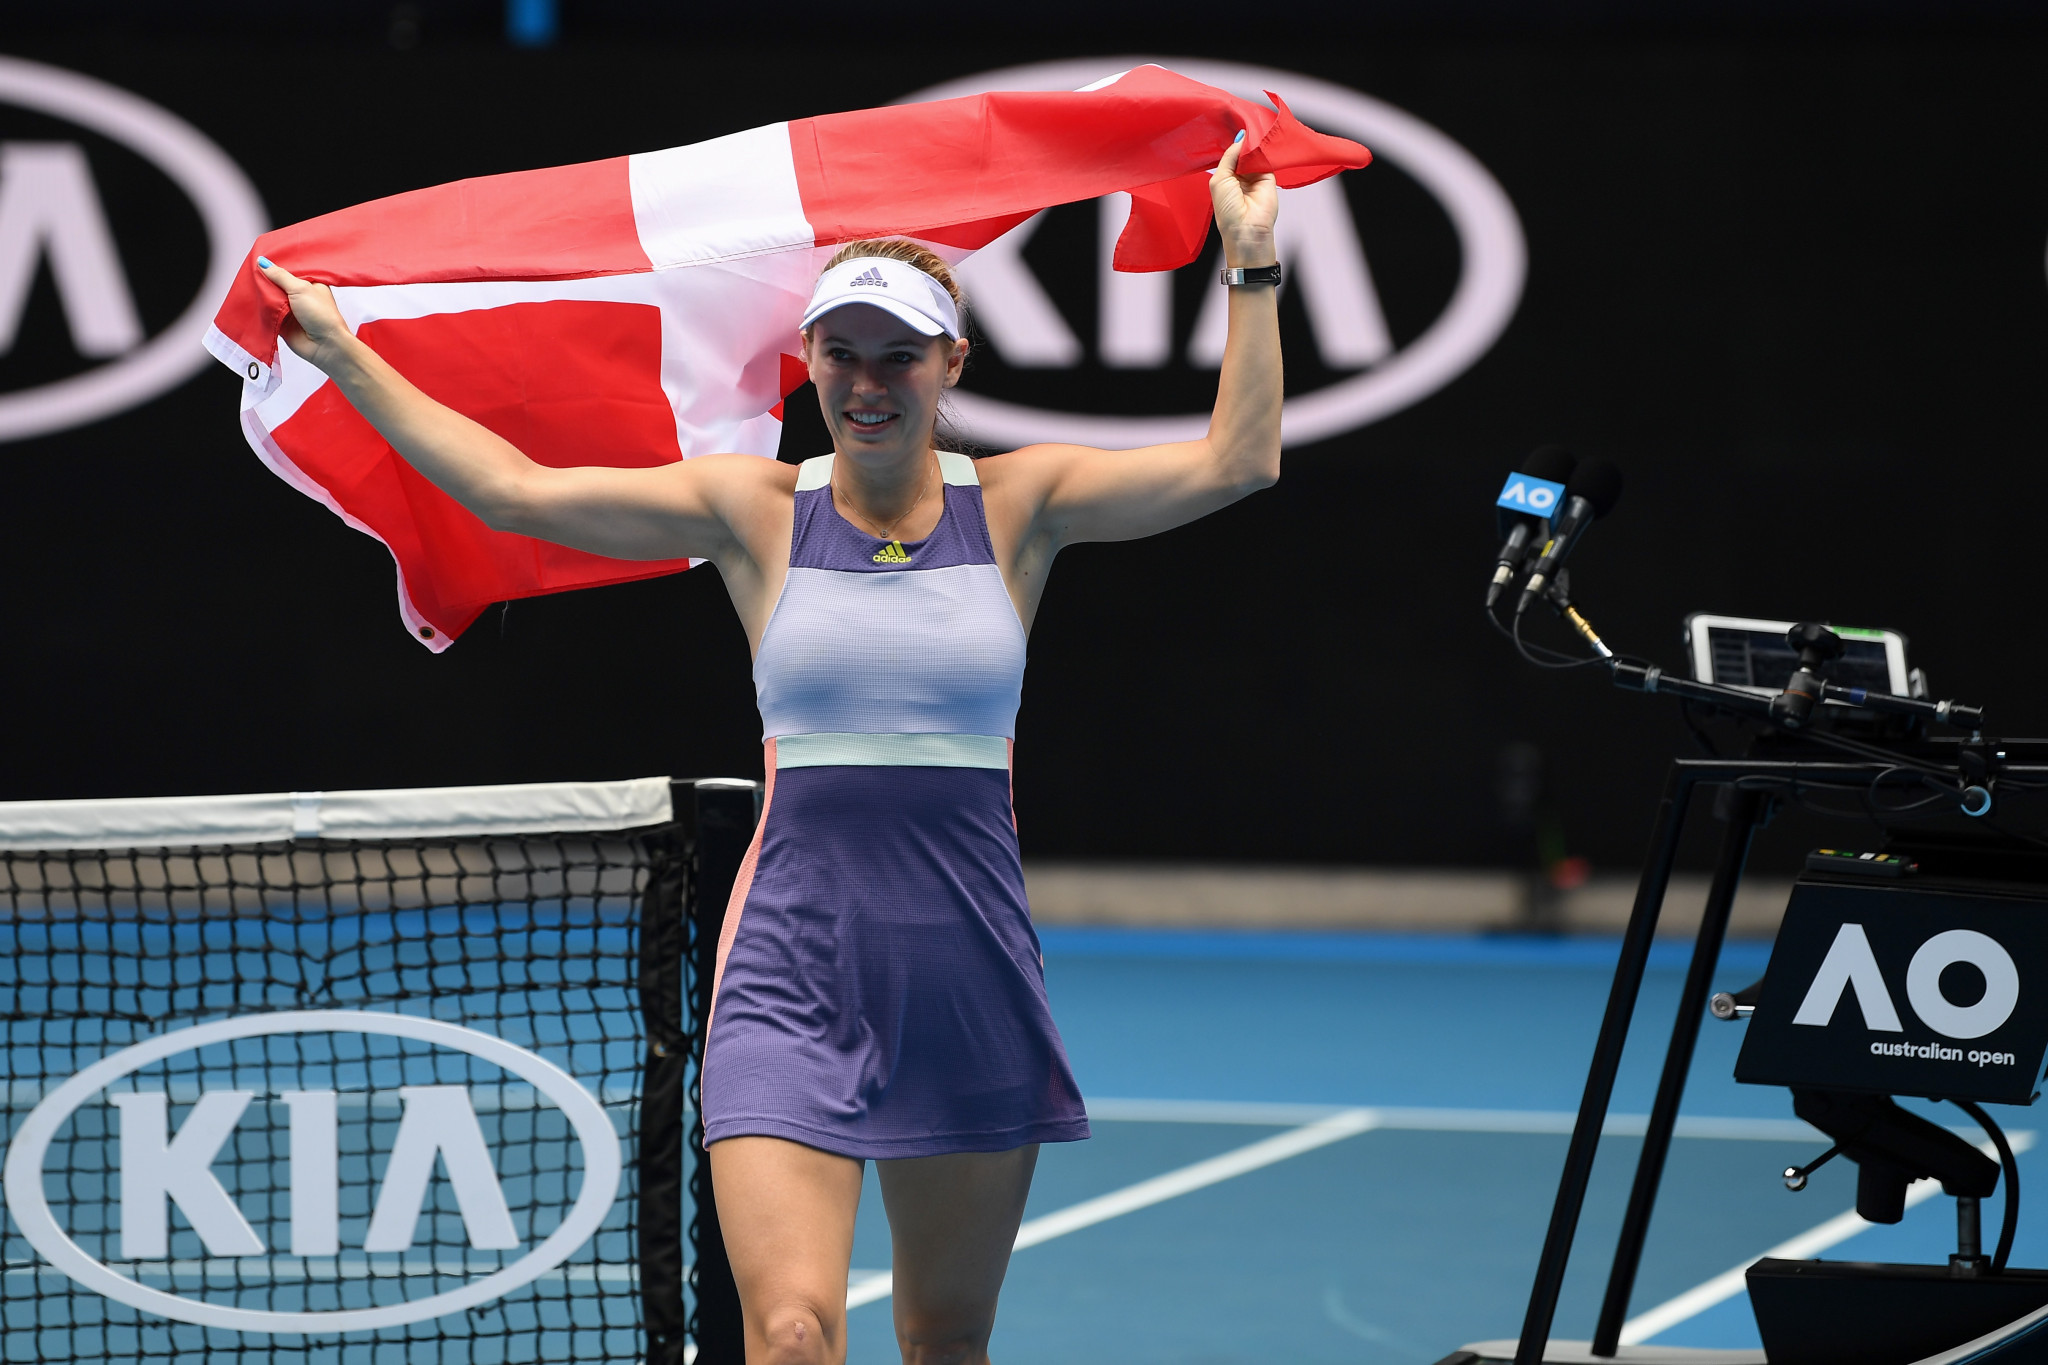 Caroline Wozniacki of Denmark played her last professional tennis match, losing 7-5, 3-6, 7-5 to Ons Jabeur of Tunisia ©Getty Images